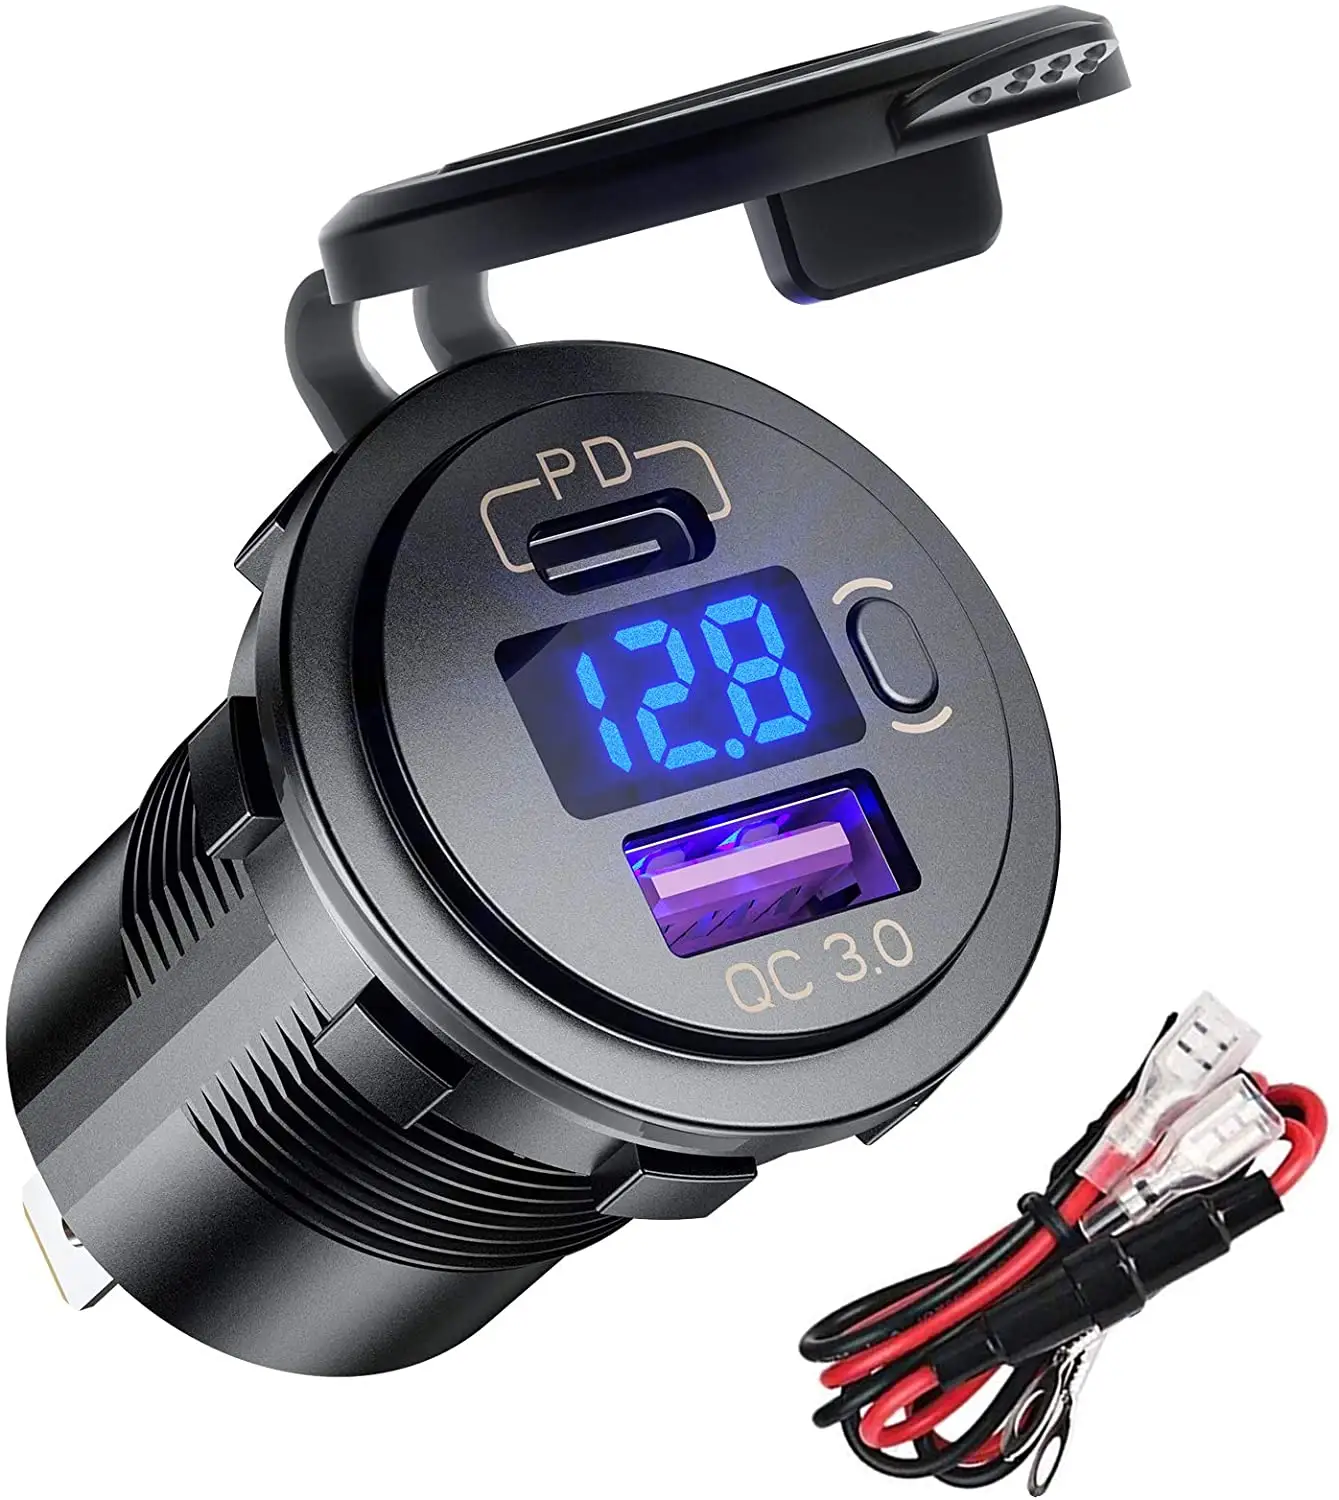 Waterproof Marine Boat USB Charger 12V Dual USB C PD3.0 Type C QC3.0 Car Charger Socket Power Outlet With LED Voltmeter Switch